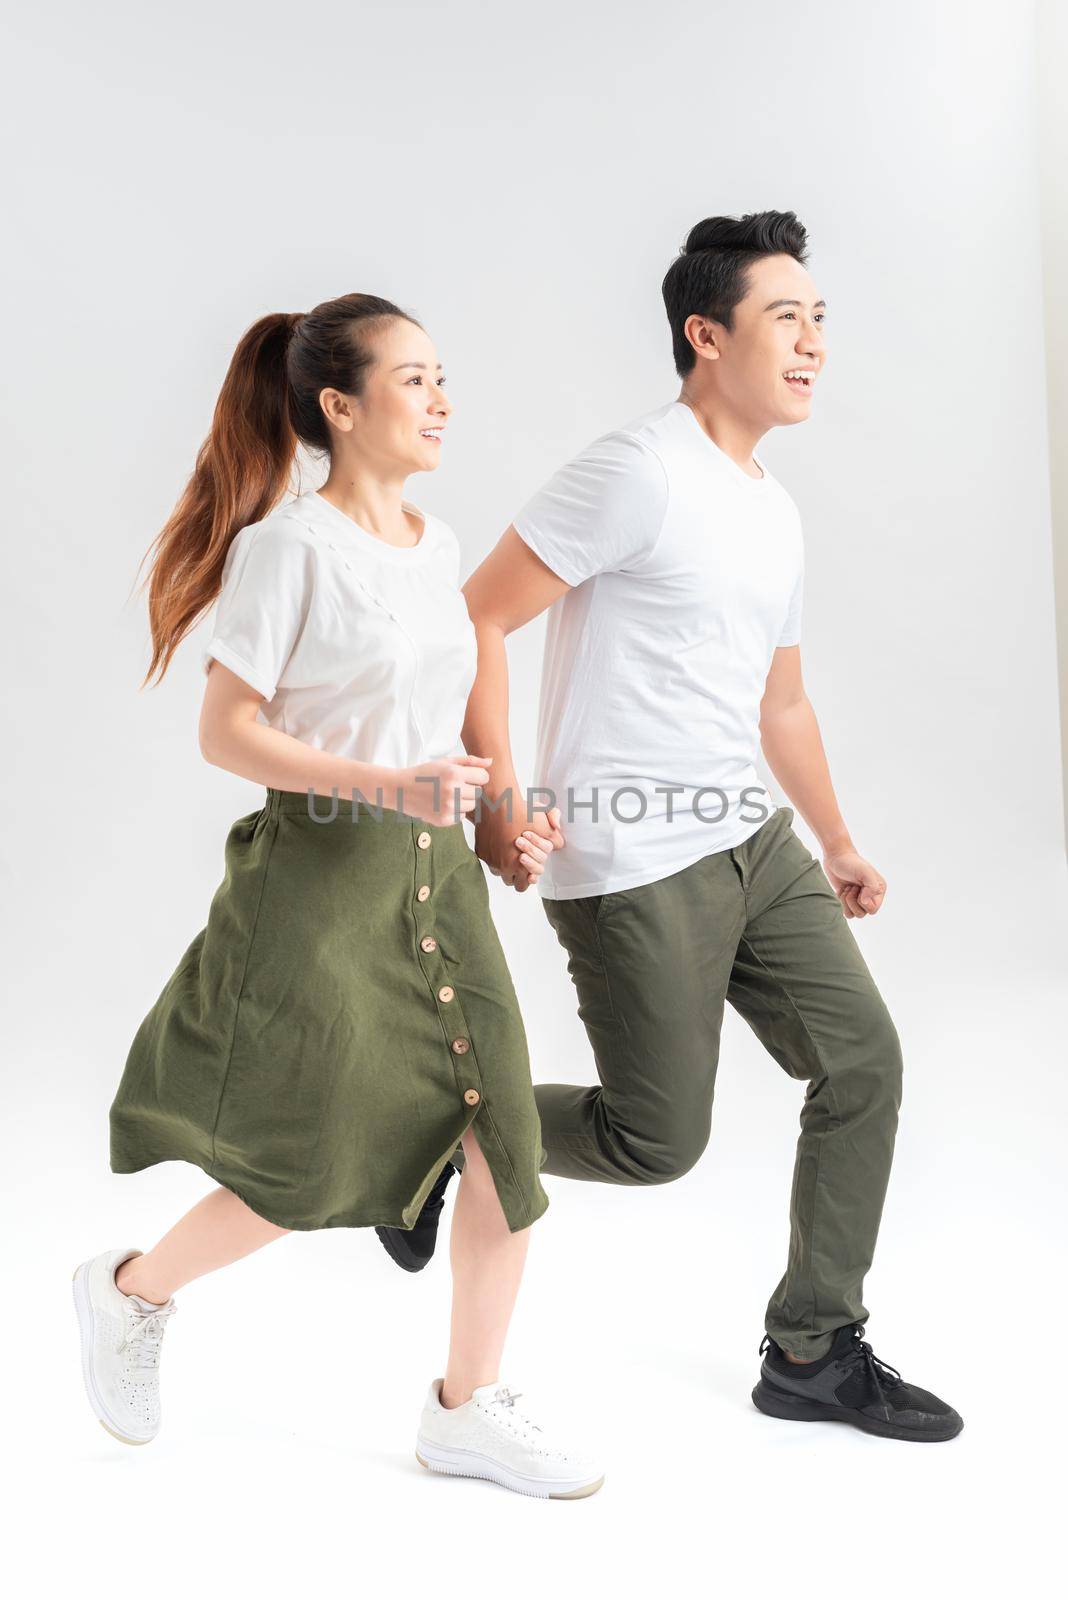 in full growth. young couple walking together